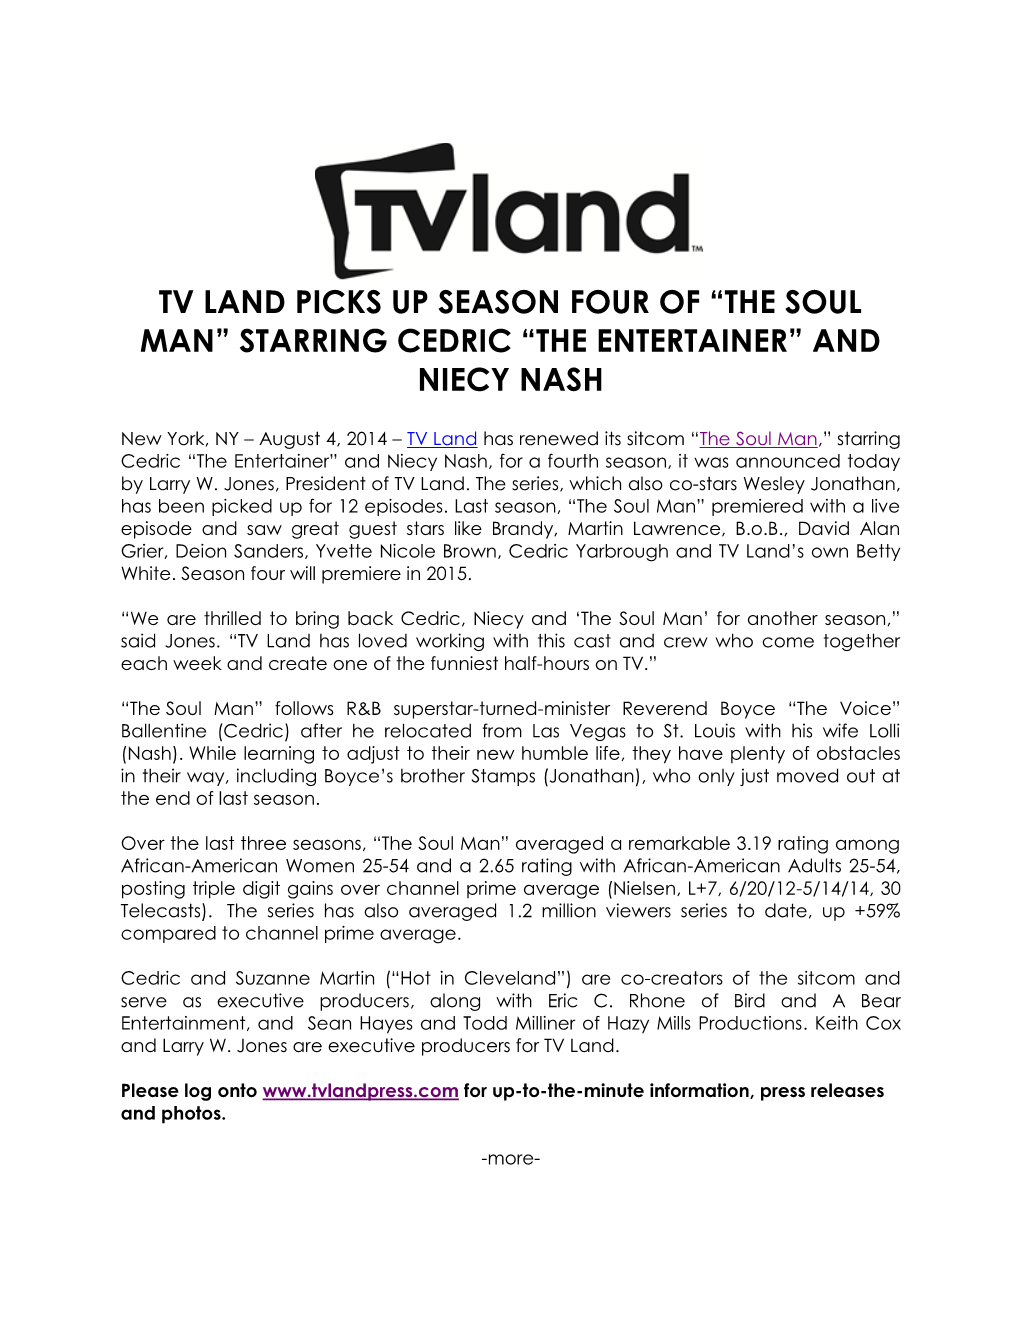 Tv Land Picks up Season Four of “The Soul Man” Starring Cedric “The Entertainer” and Niecy Nash